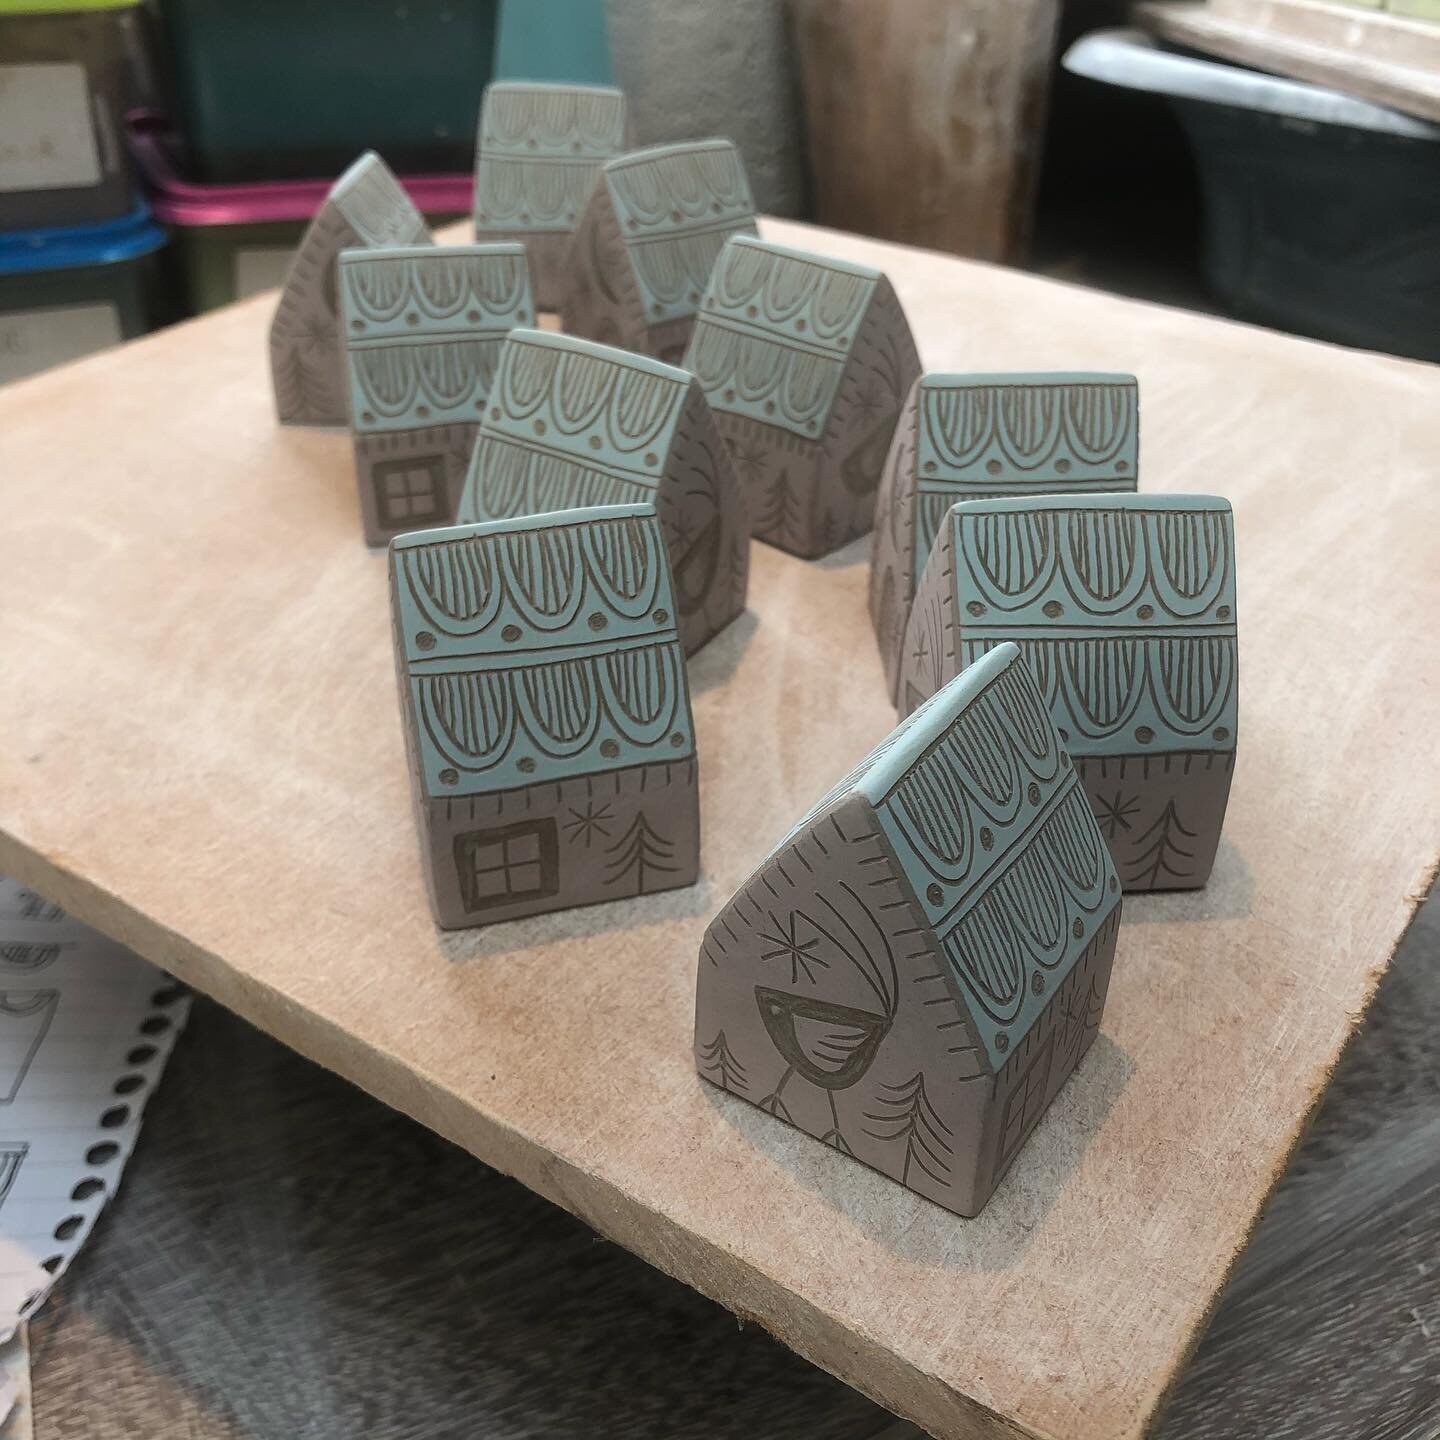 More houses today . Clay is at my favourite leatherhard stage when scraffitto design just flows and really satisfying !